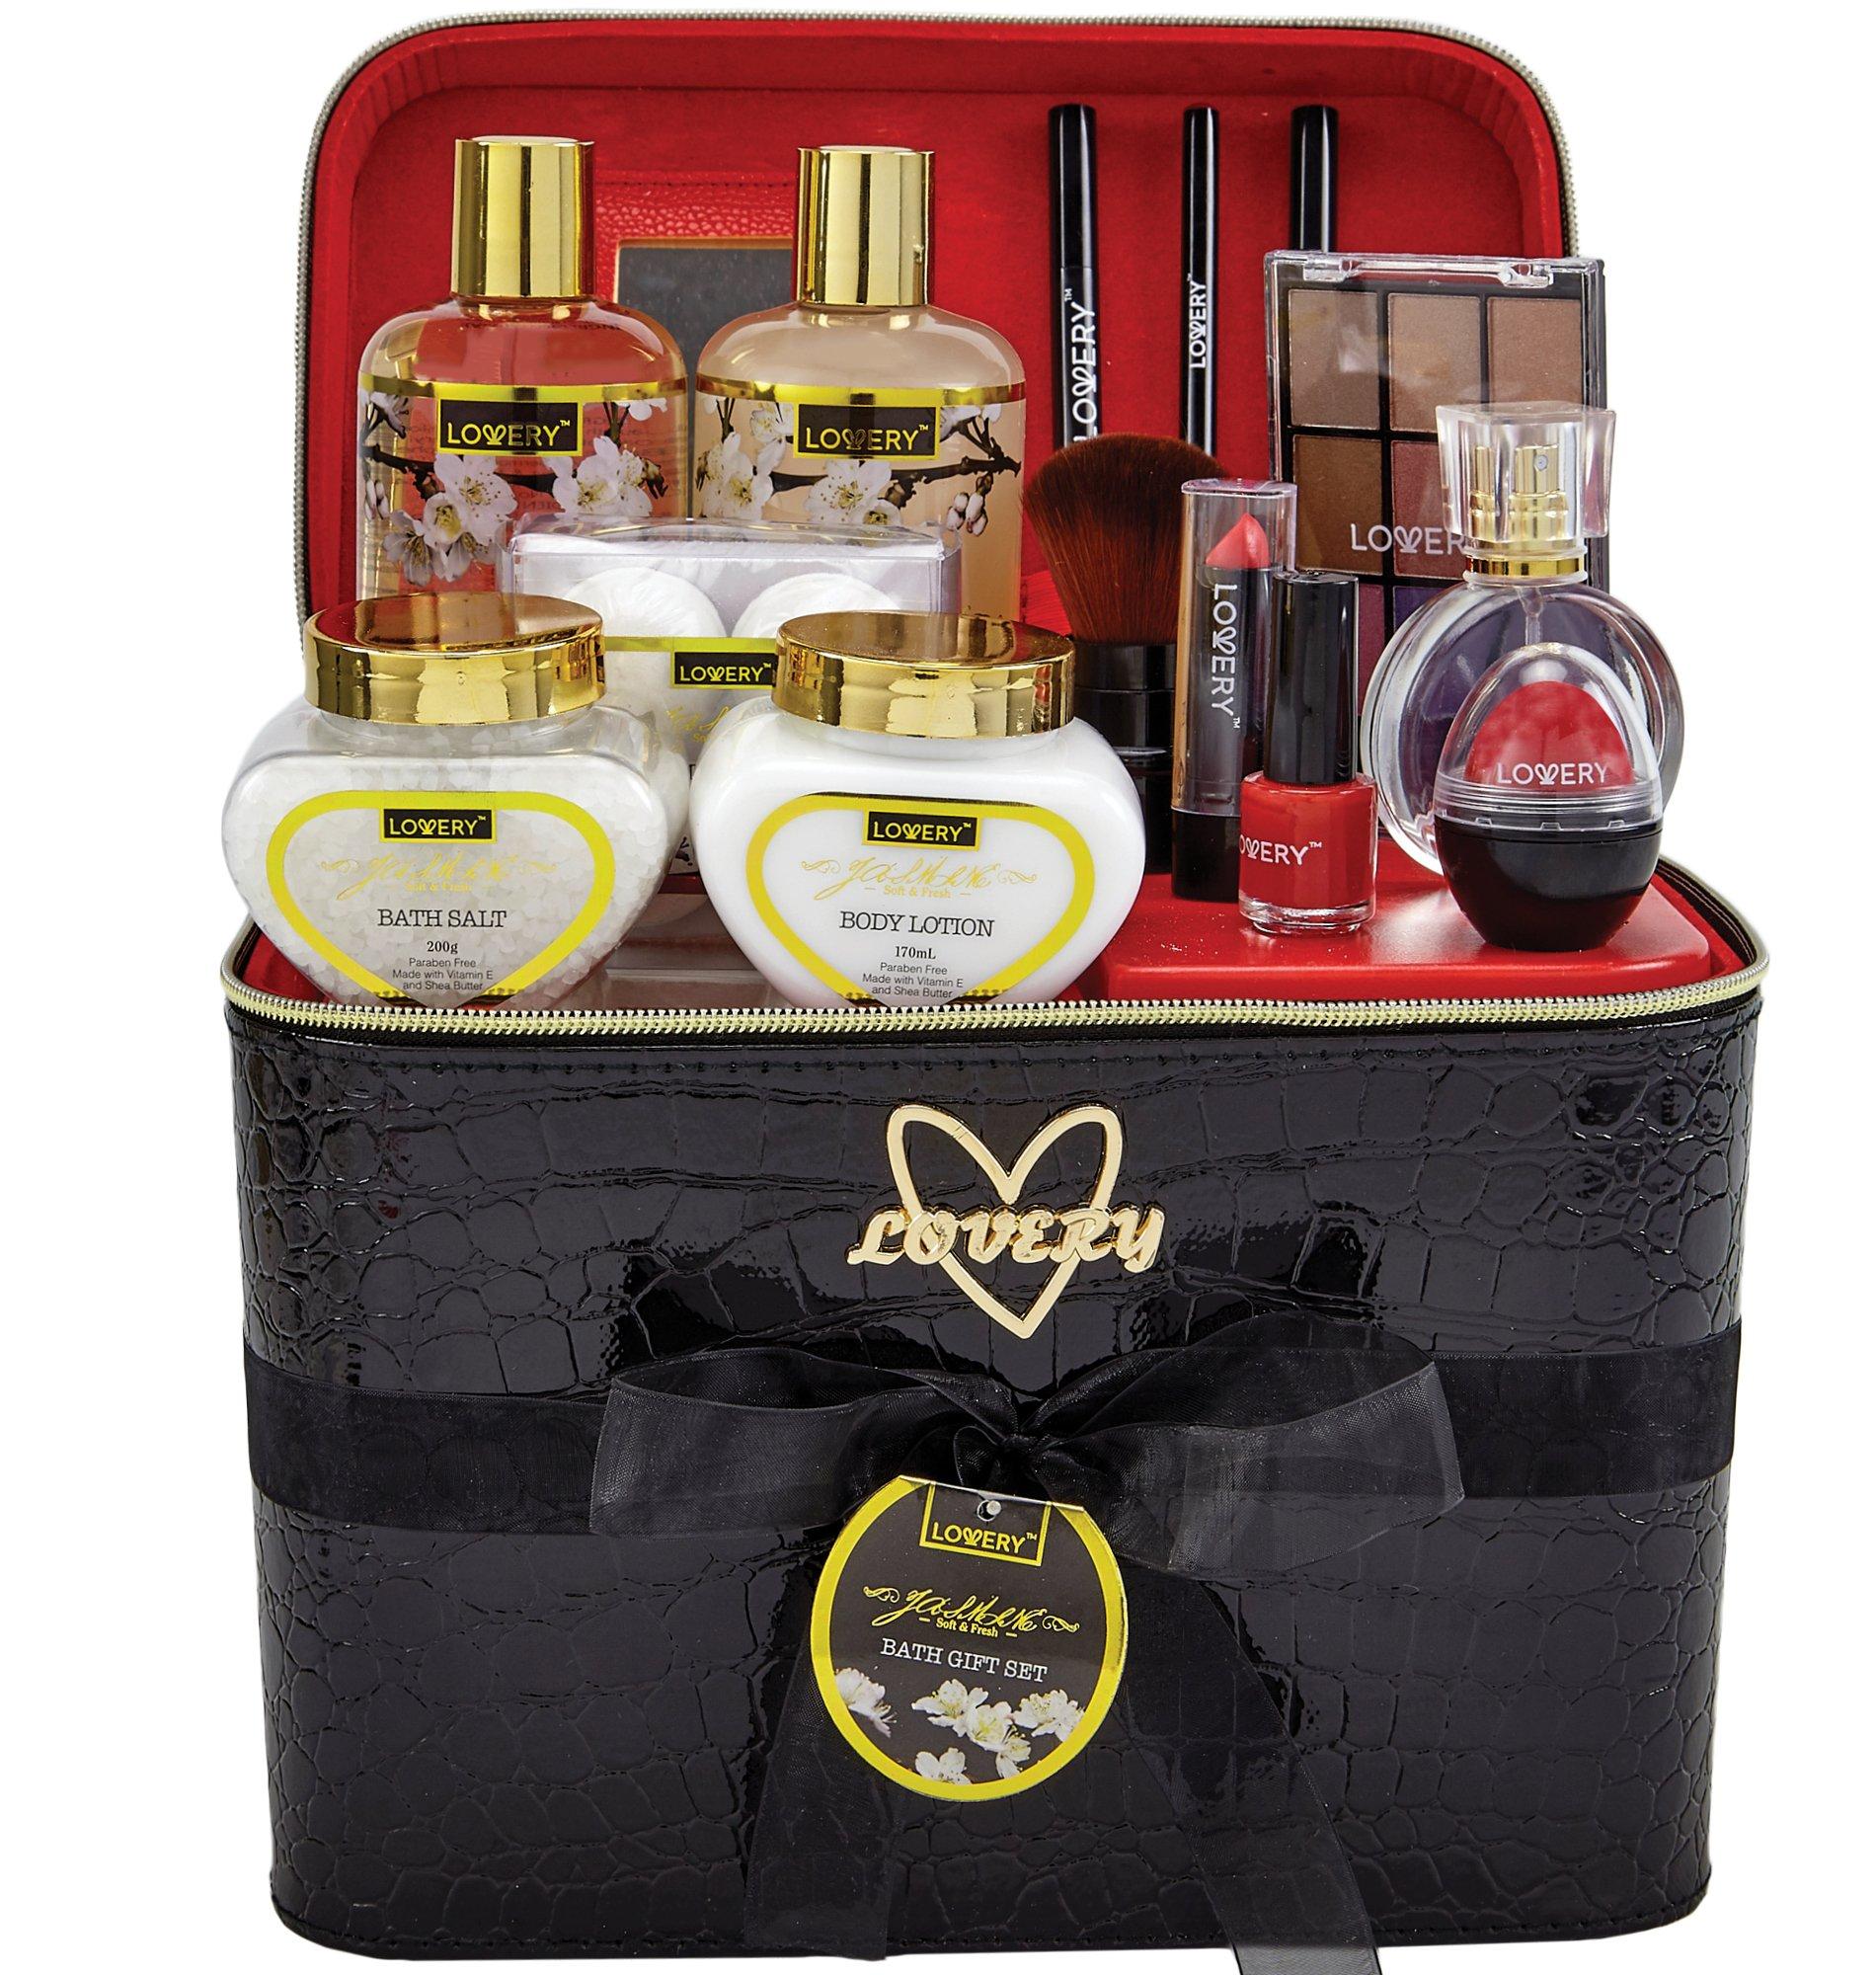 Jasmine Bath and Body Gift Set with Makeup and Black Leather Cosmetic Bag - Lovery